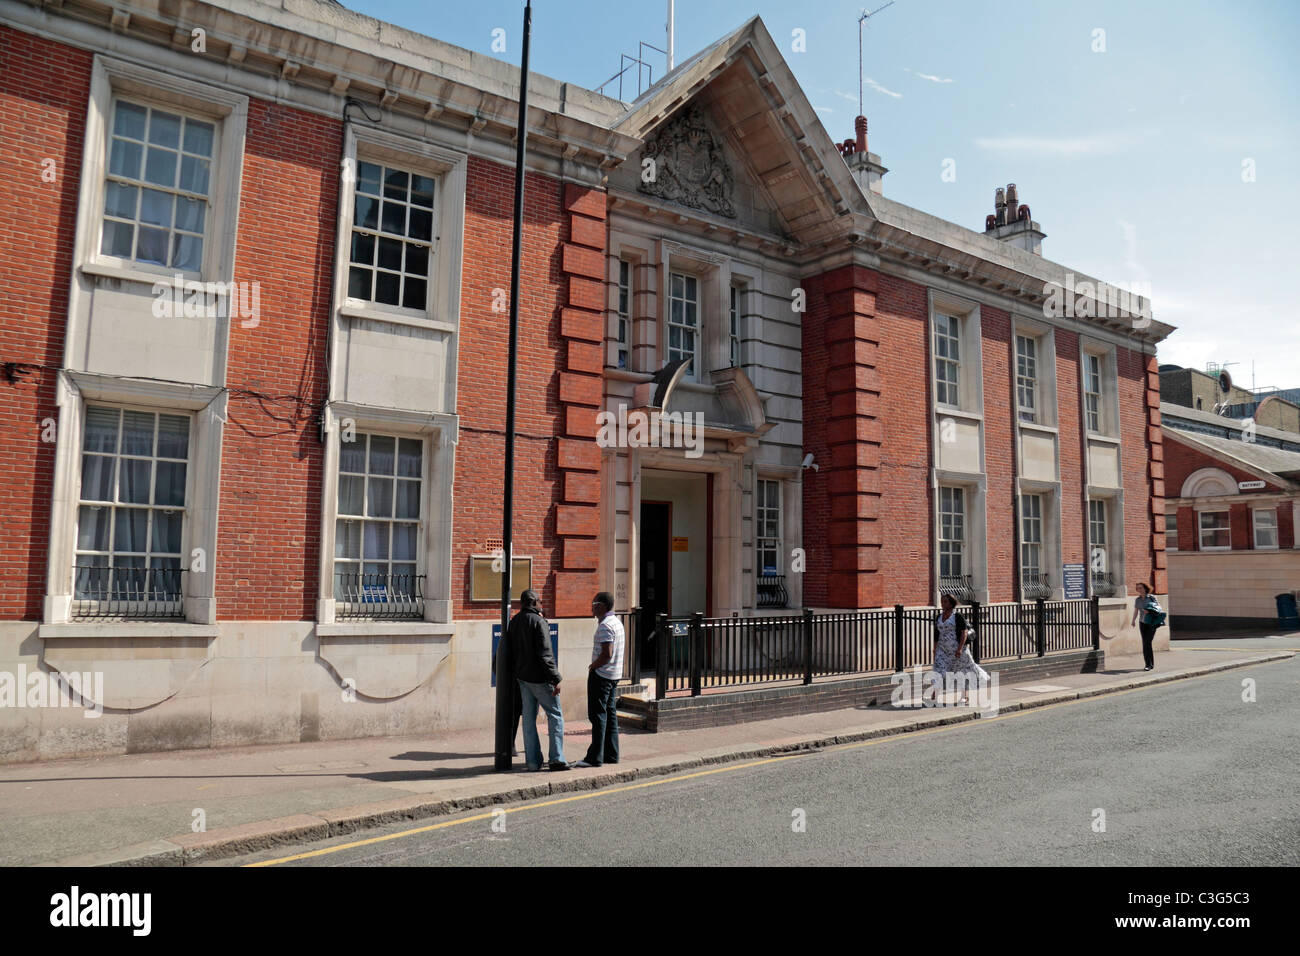 Woolwich Magistrates' Court (South Eastern Division) in Woolwich Stadtmitte, East London, UK. Stockfoto